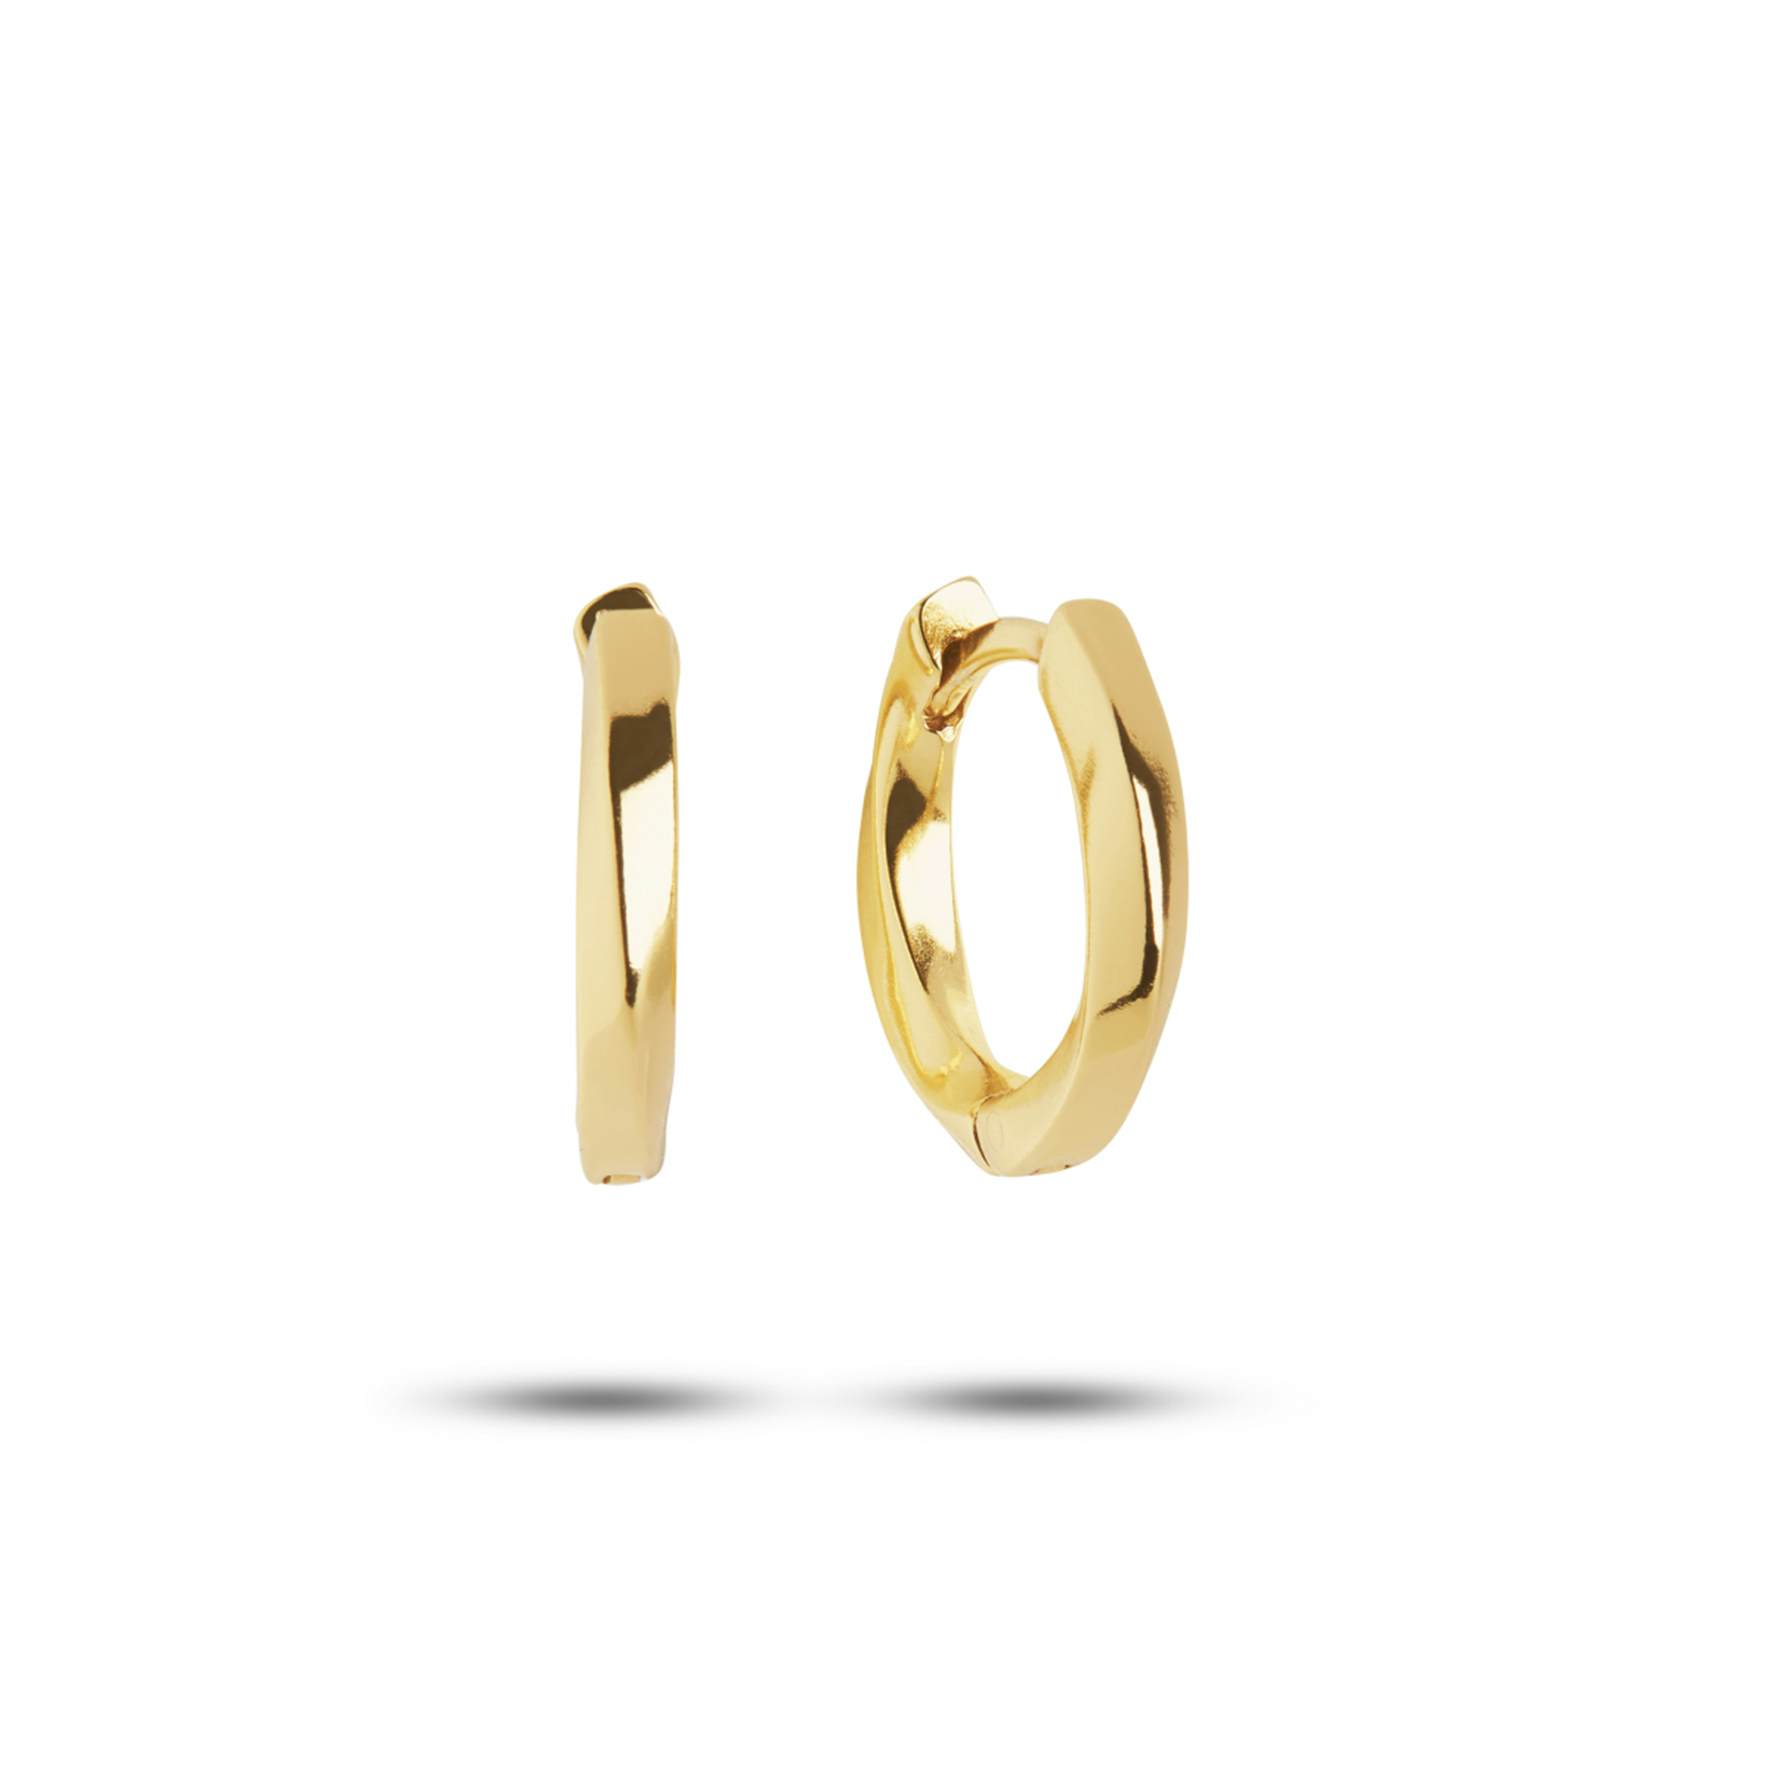 Classic Twist Hoops from Carré in Goldplated-Silver Sterling 925